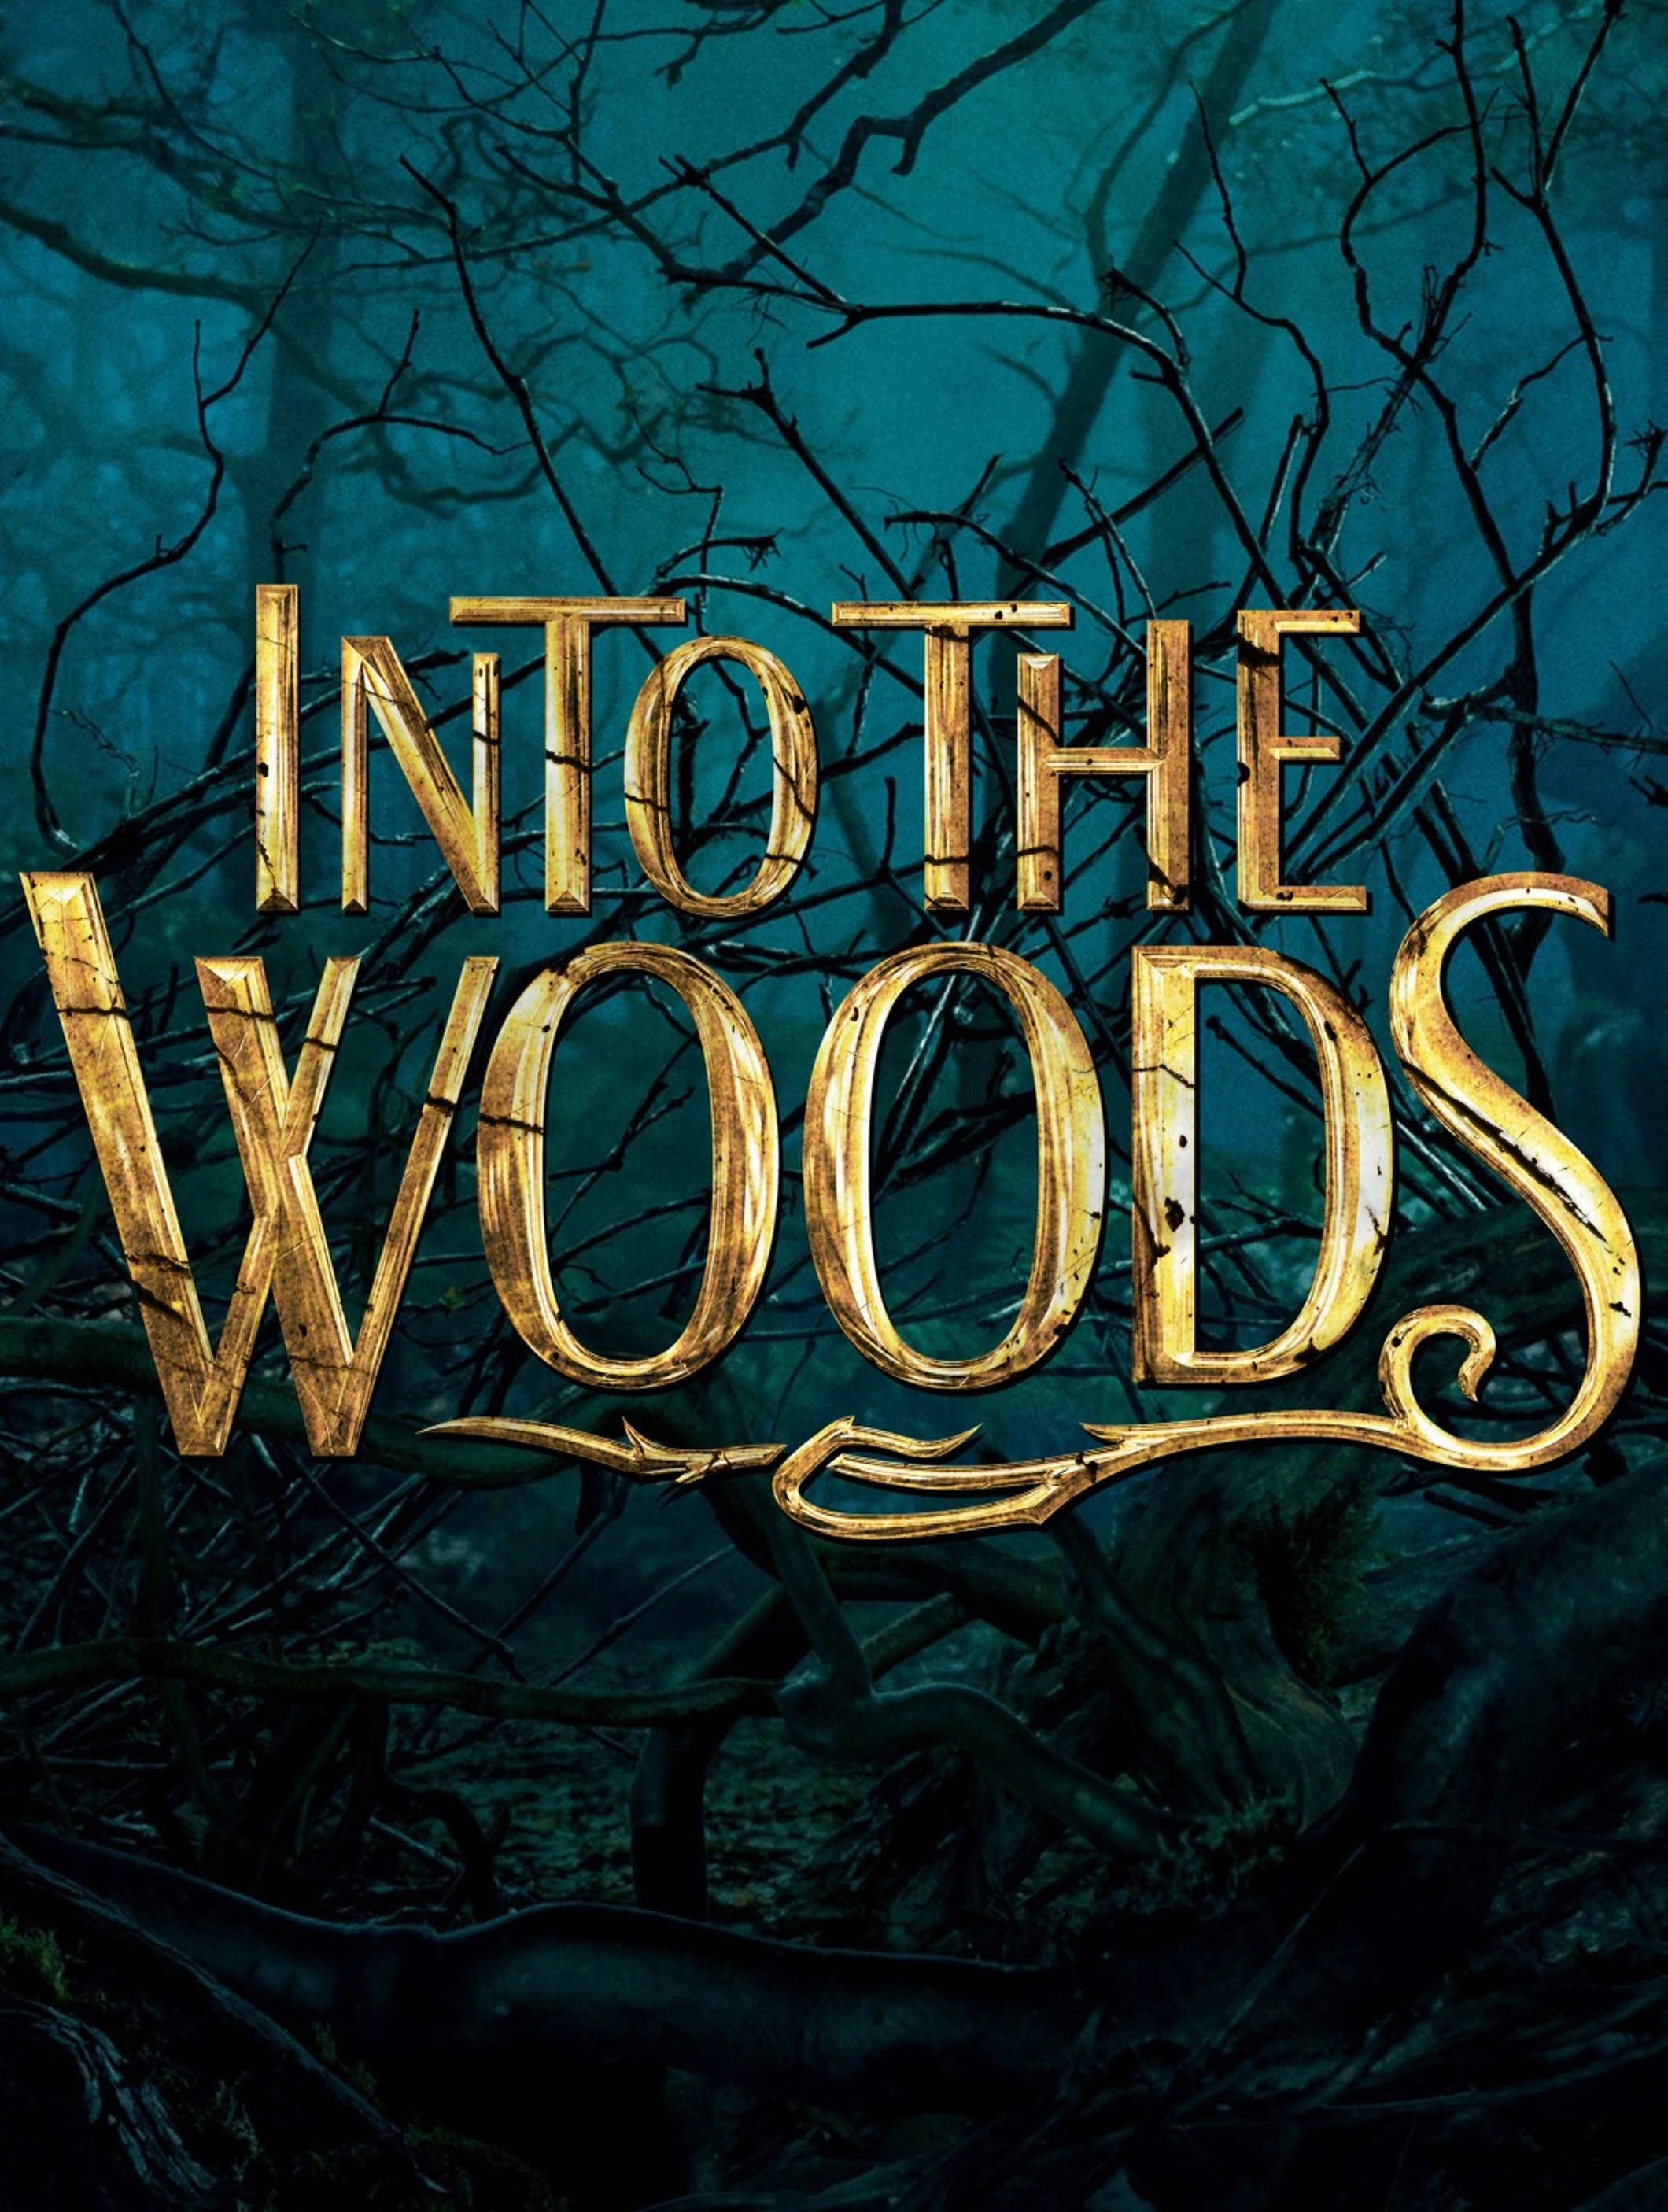 into the woods movie poster 2022